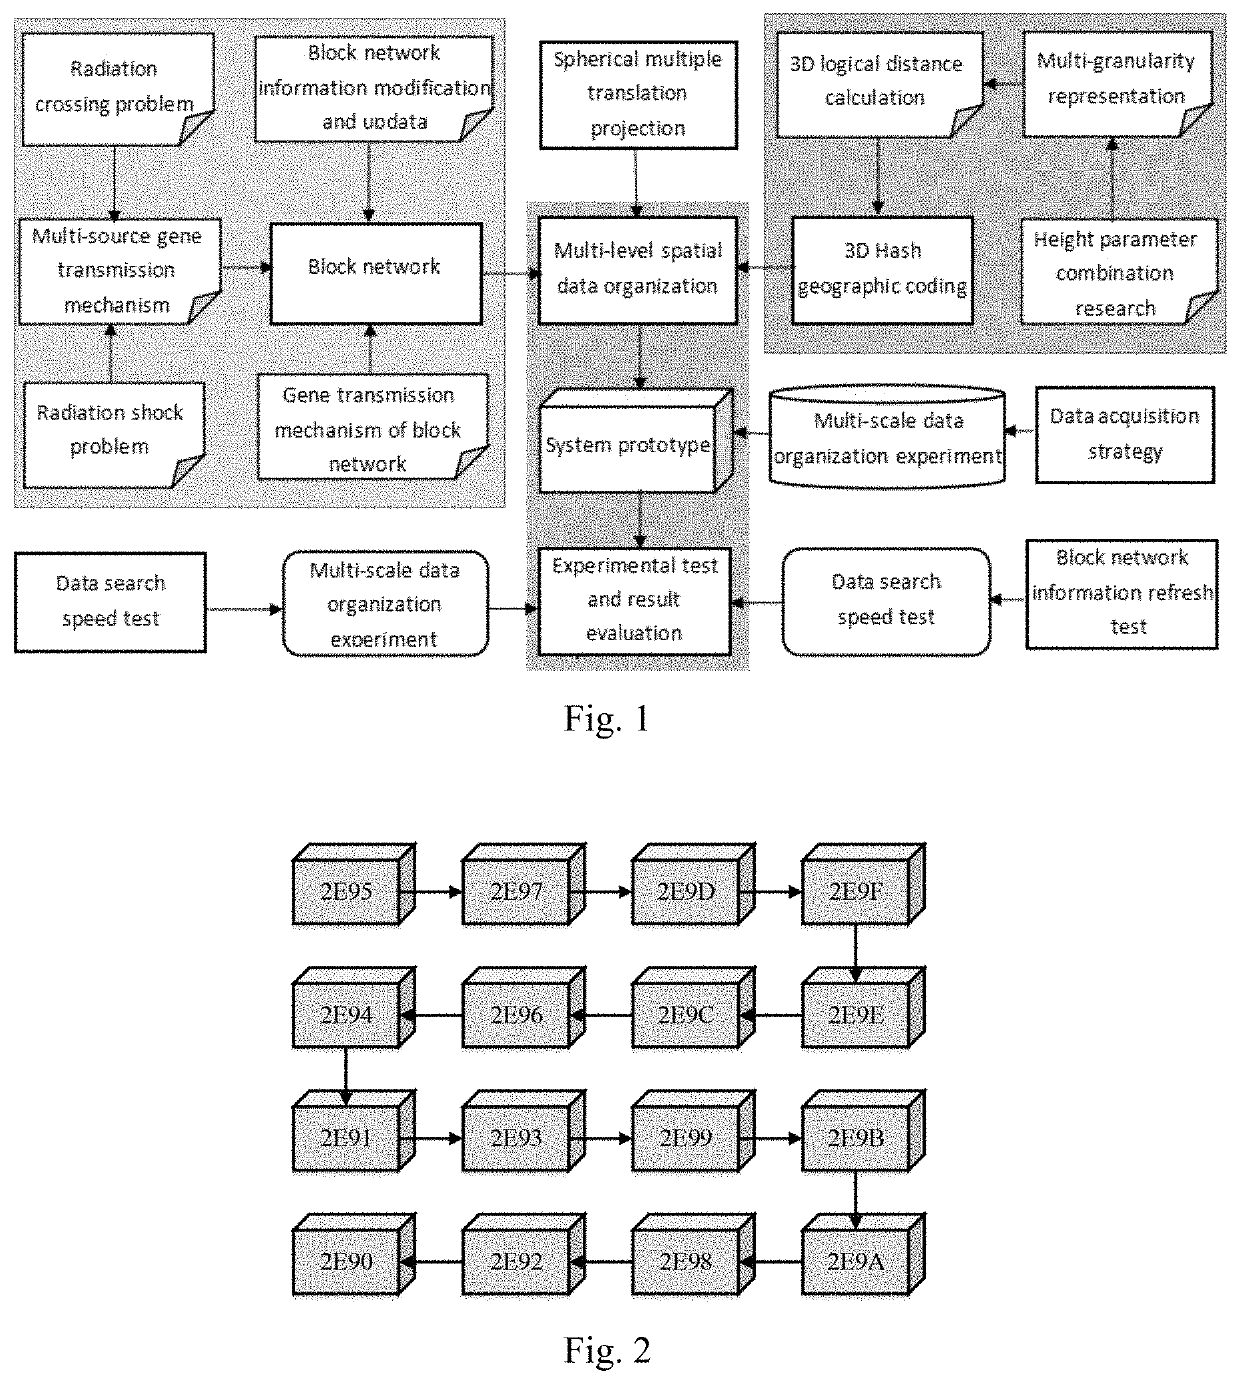 BlockNet security organization storage mapping method for spatial data